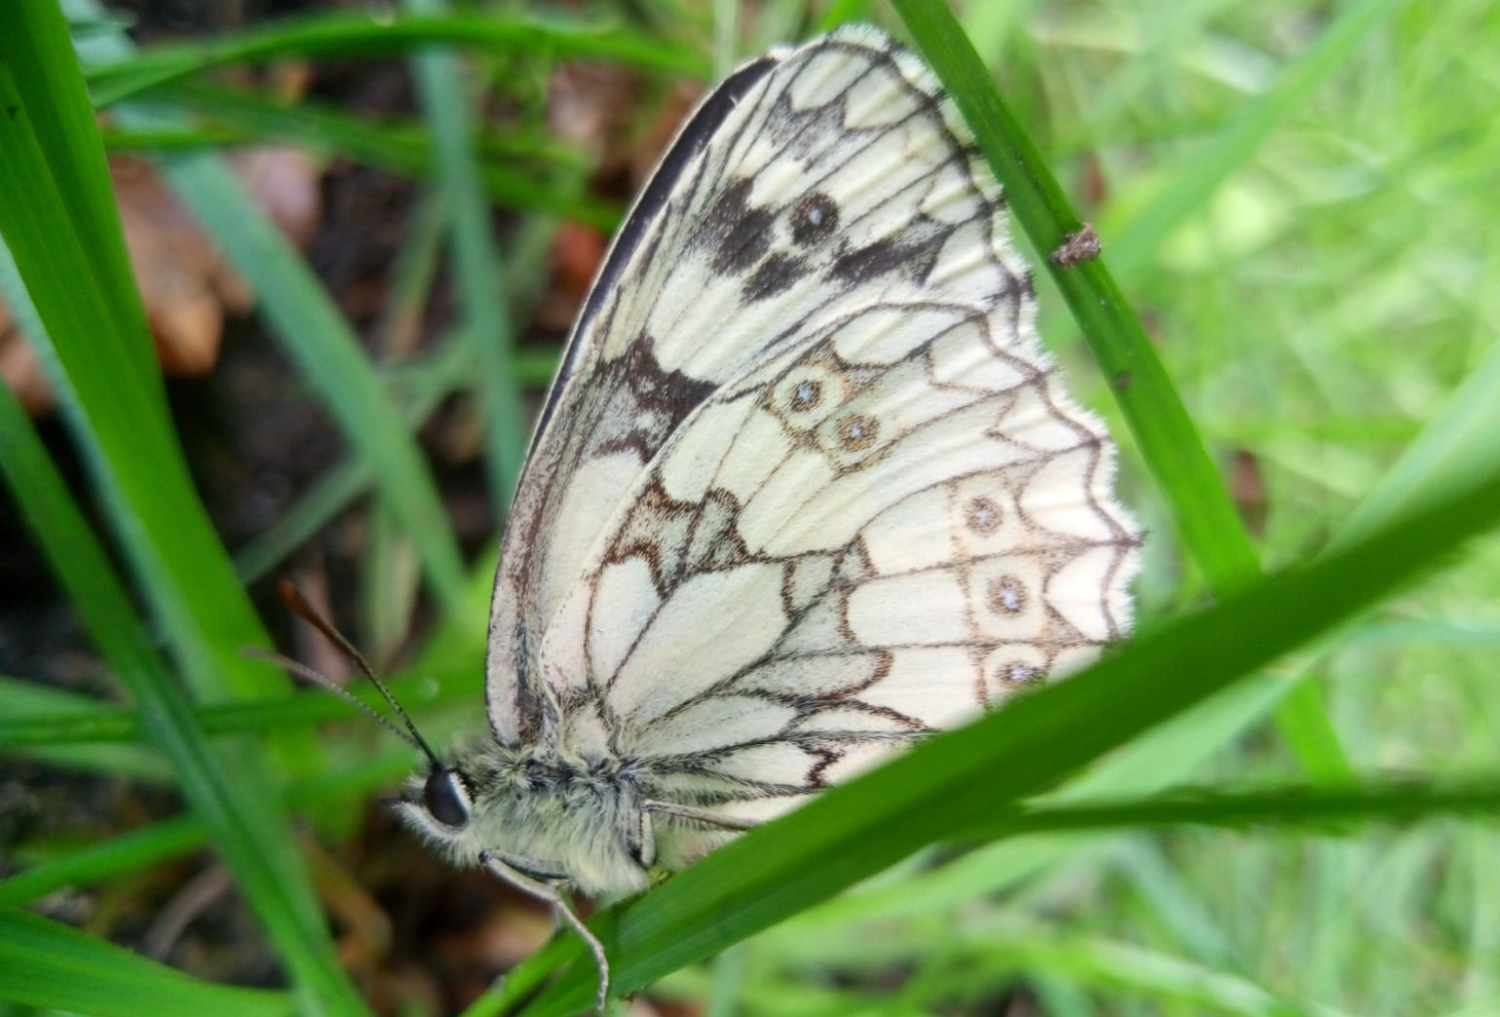 A marbled white resting on grass.